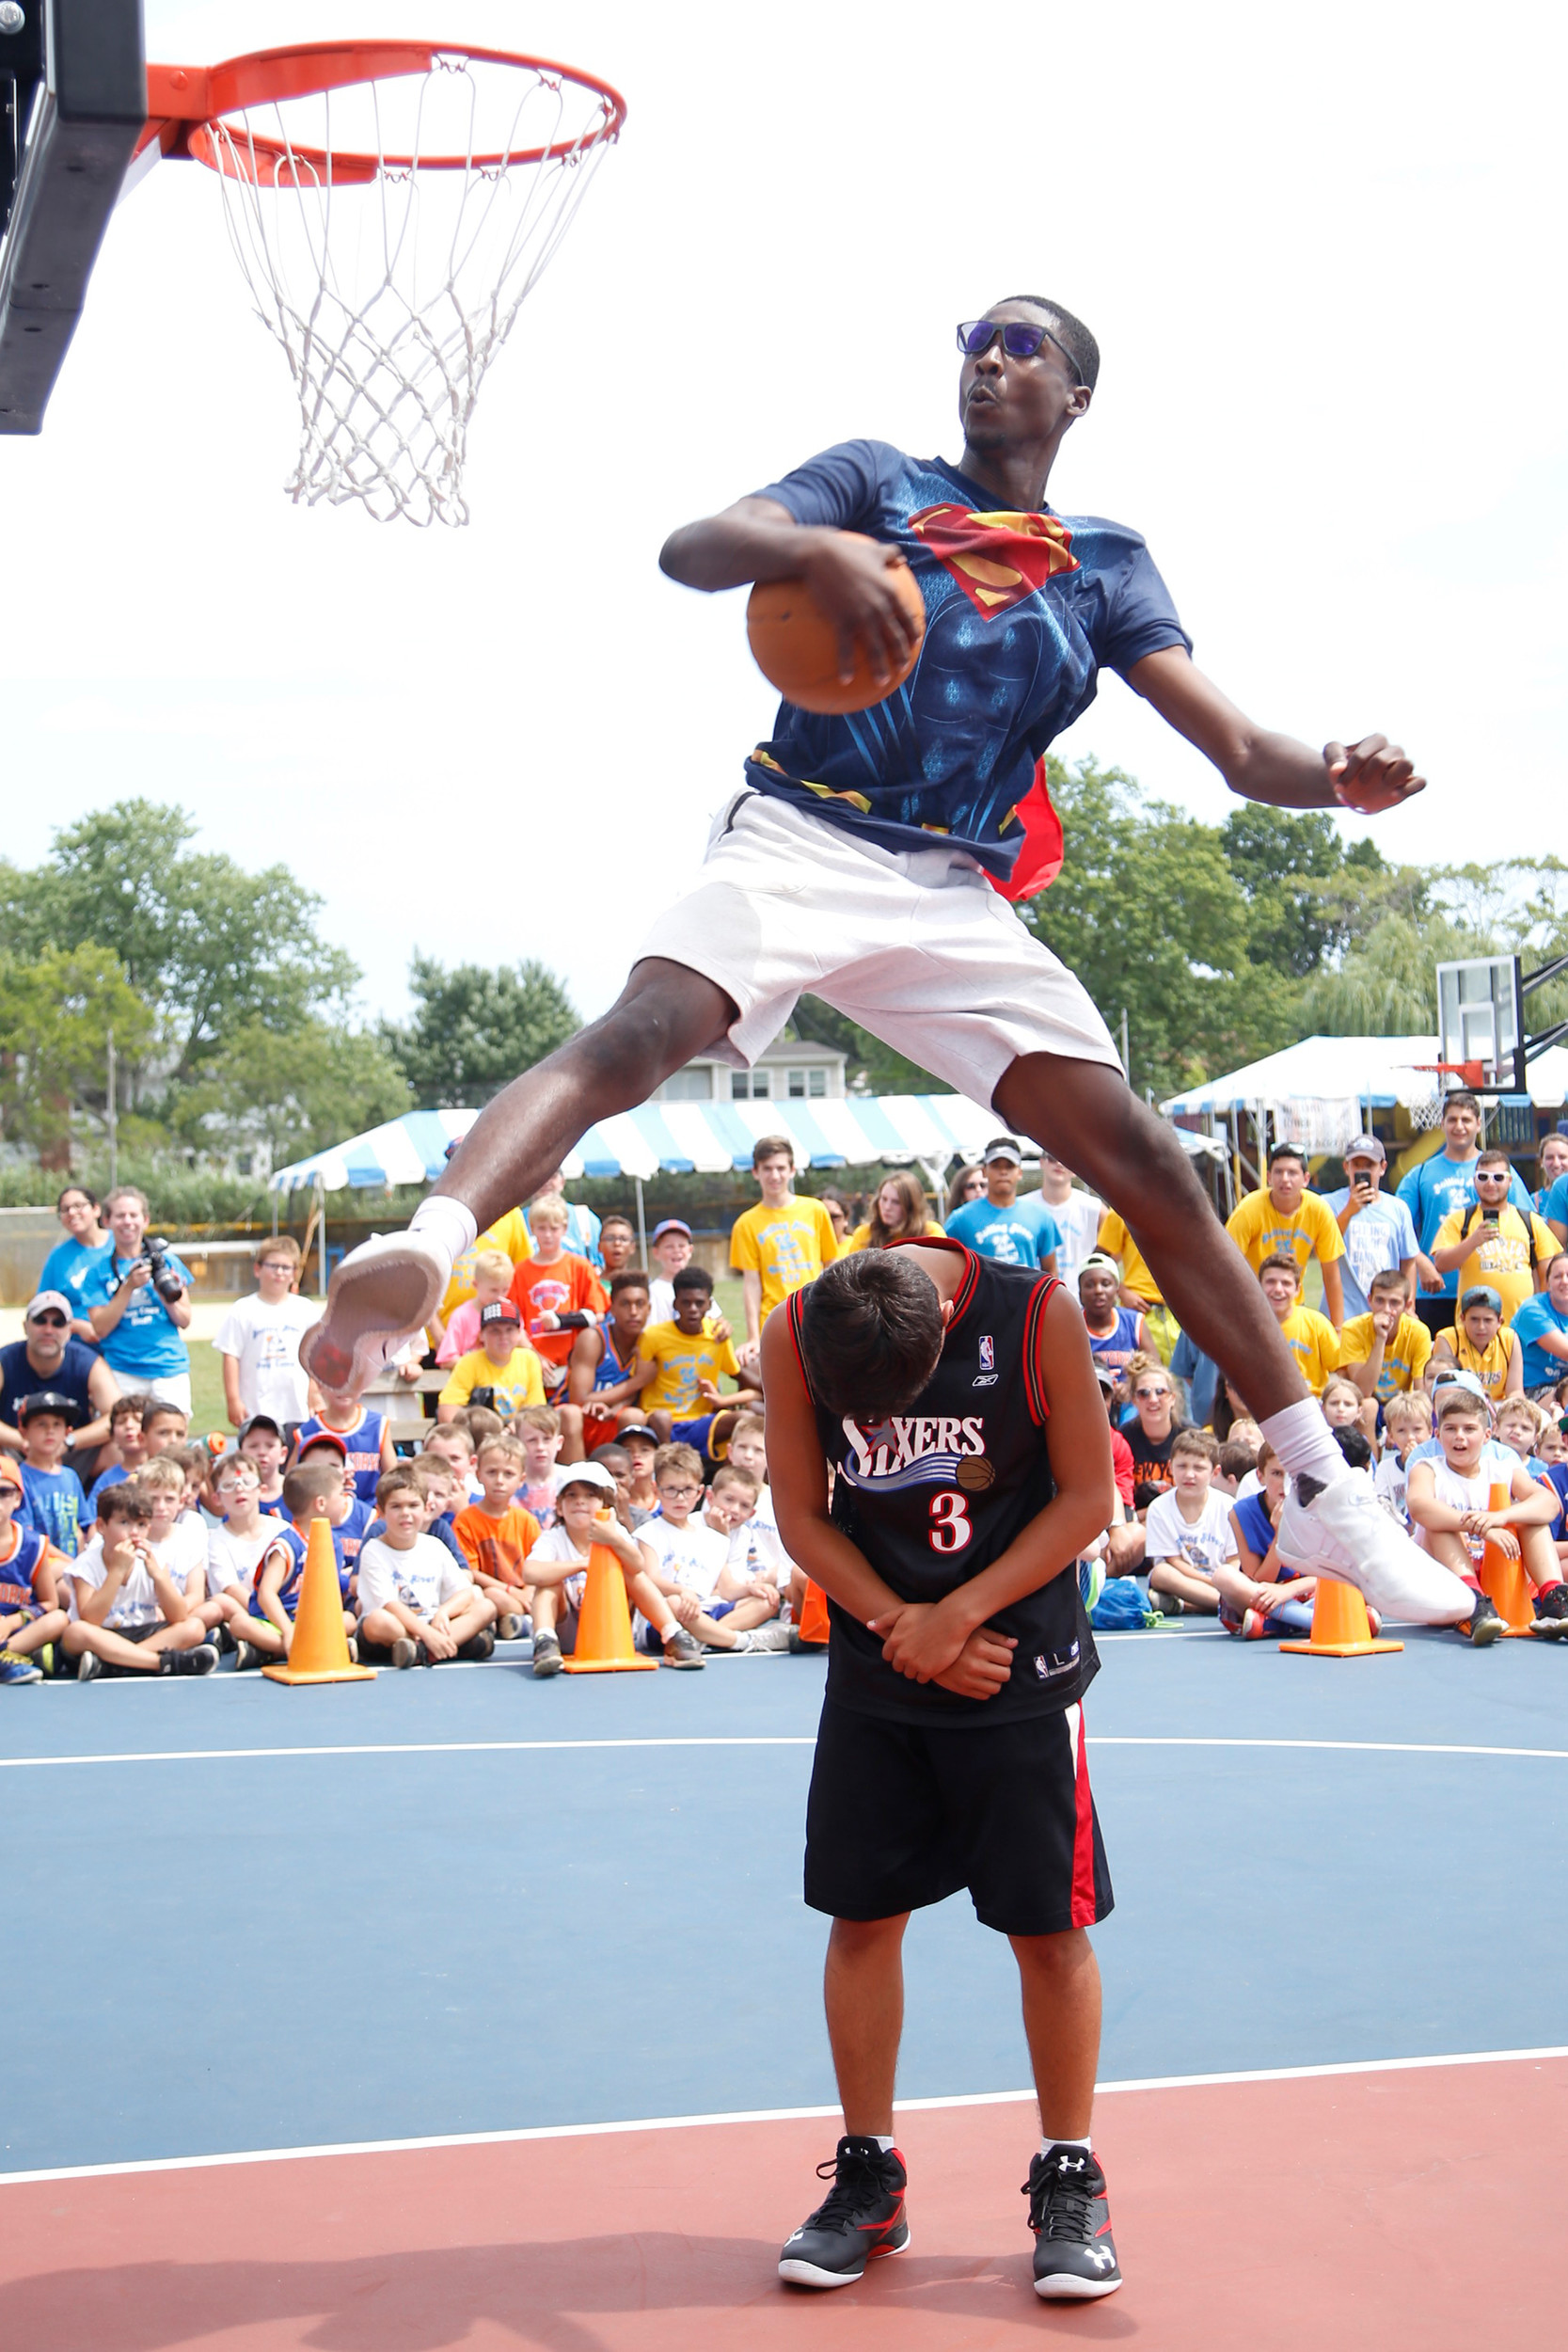 Baker was part of many events throughout the day, including the slam dunk contest. Keiron “Kay” Jeremiah of Brooklyn leaped over one of his friends when it was his turn to show his skills.